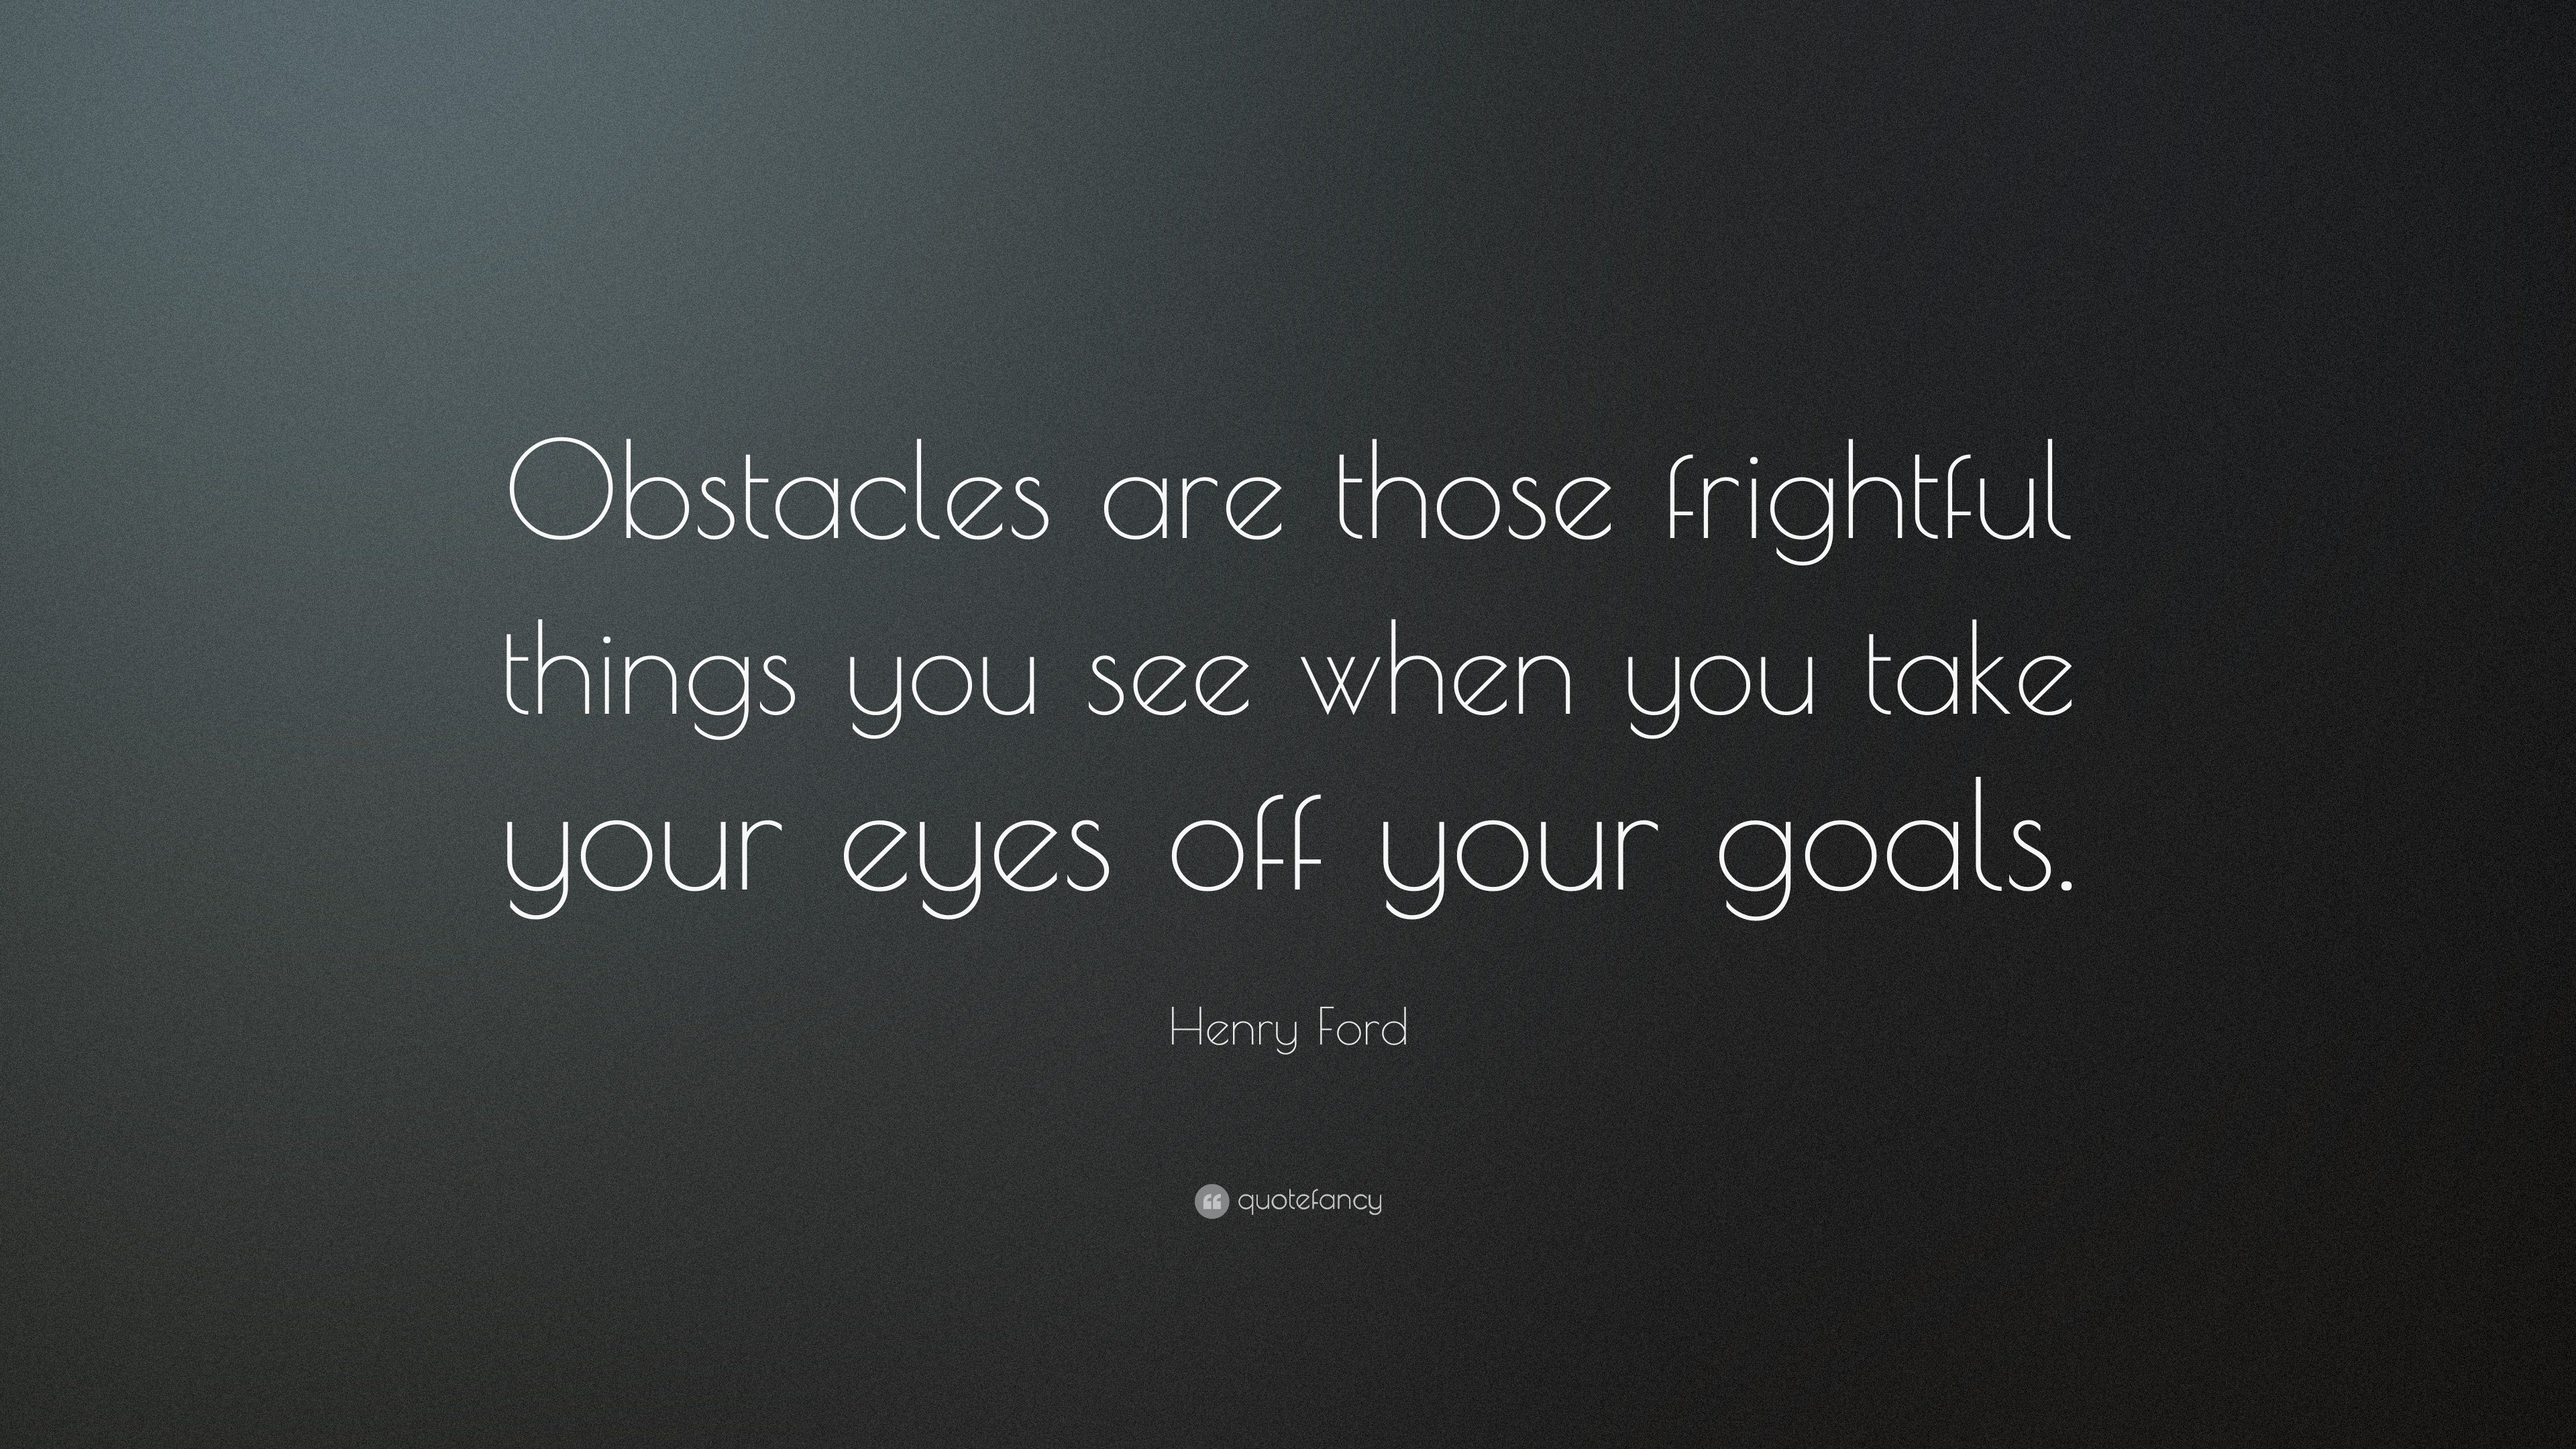 Henry ford obstacles are those frightful things #10